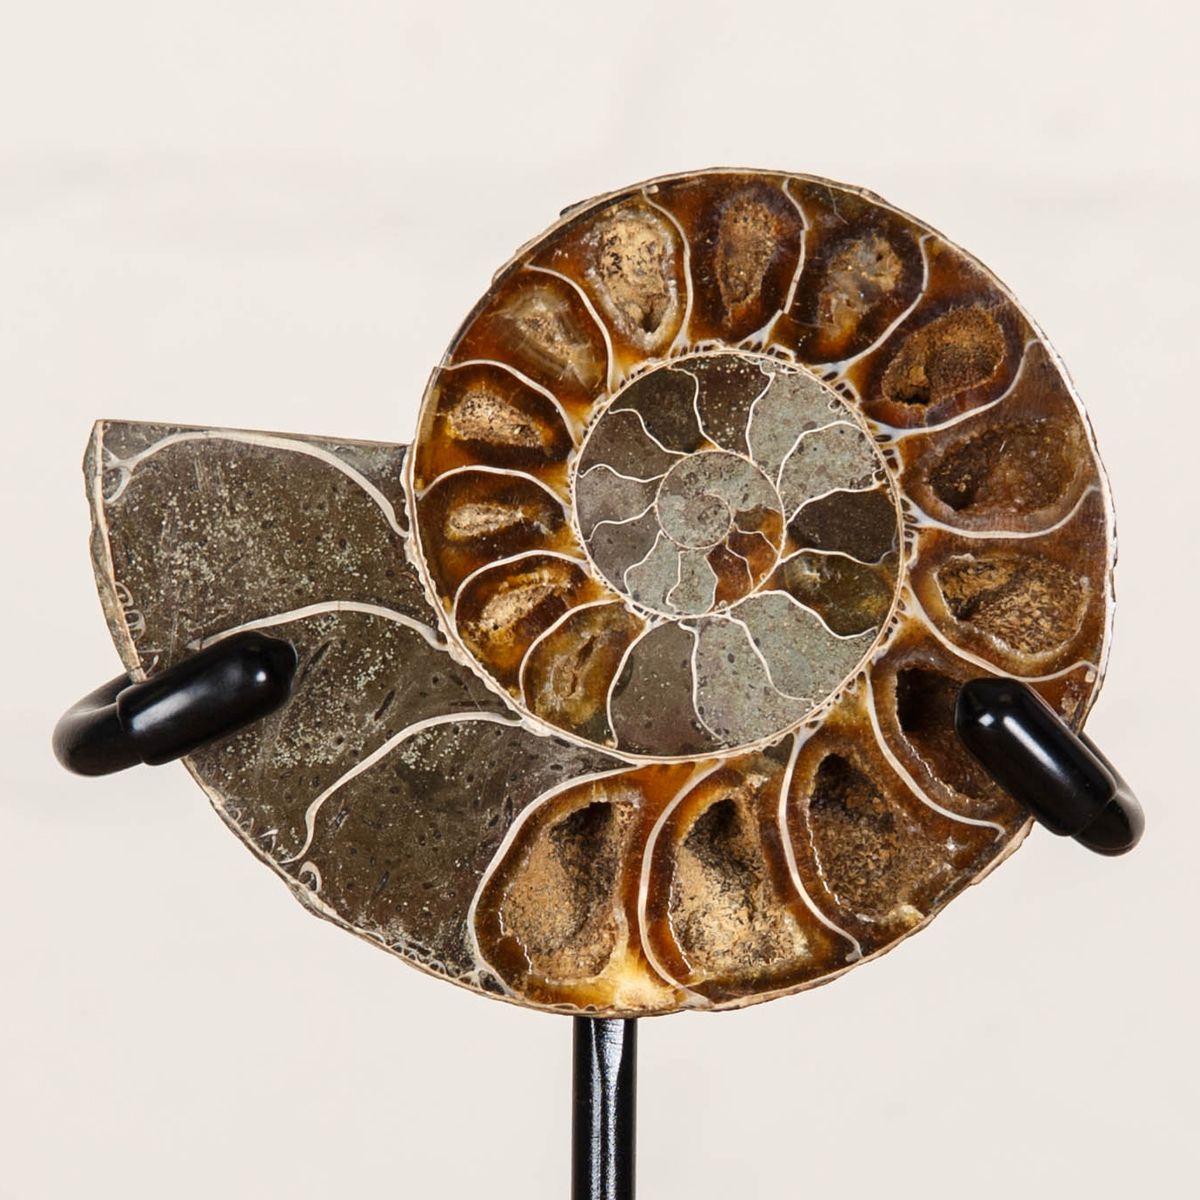 3.6 inch Polished & Sliced Ammonite Fossil on Stand (Cleoniceras sp)